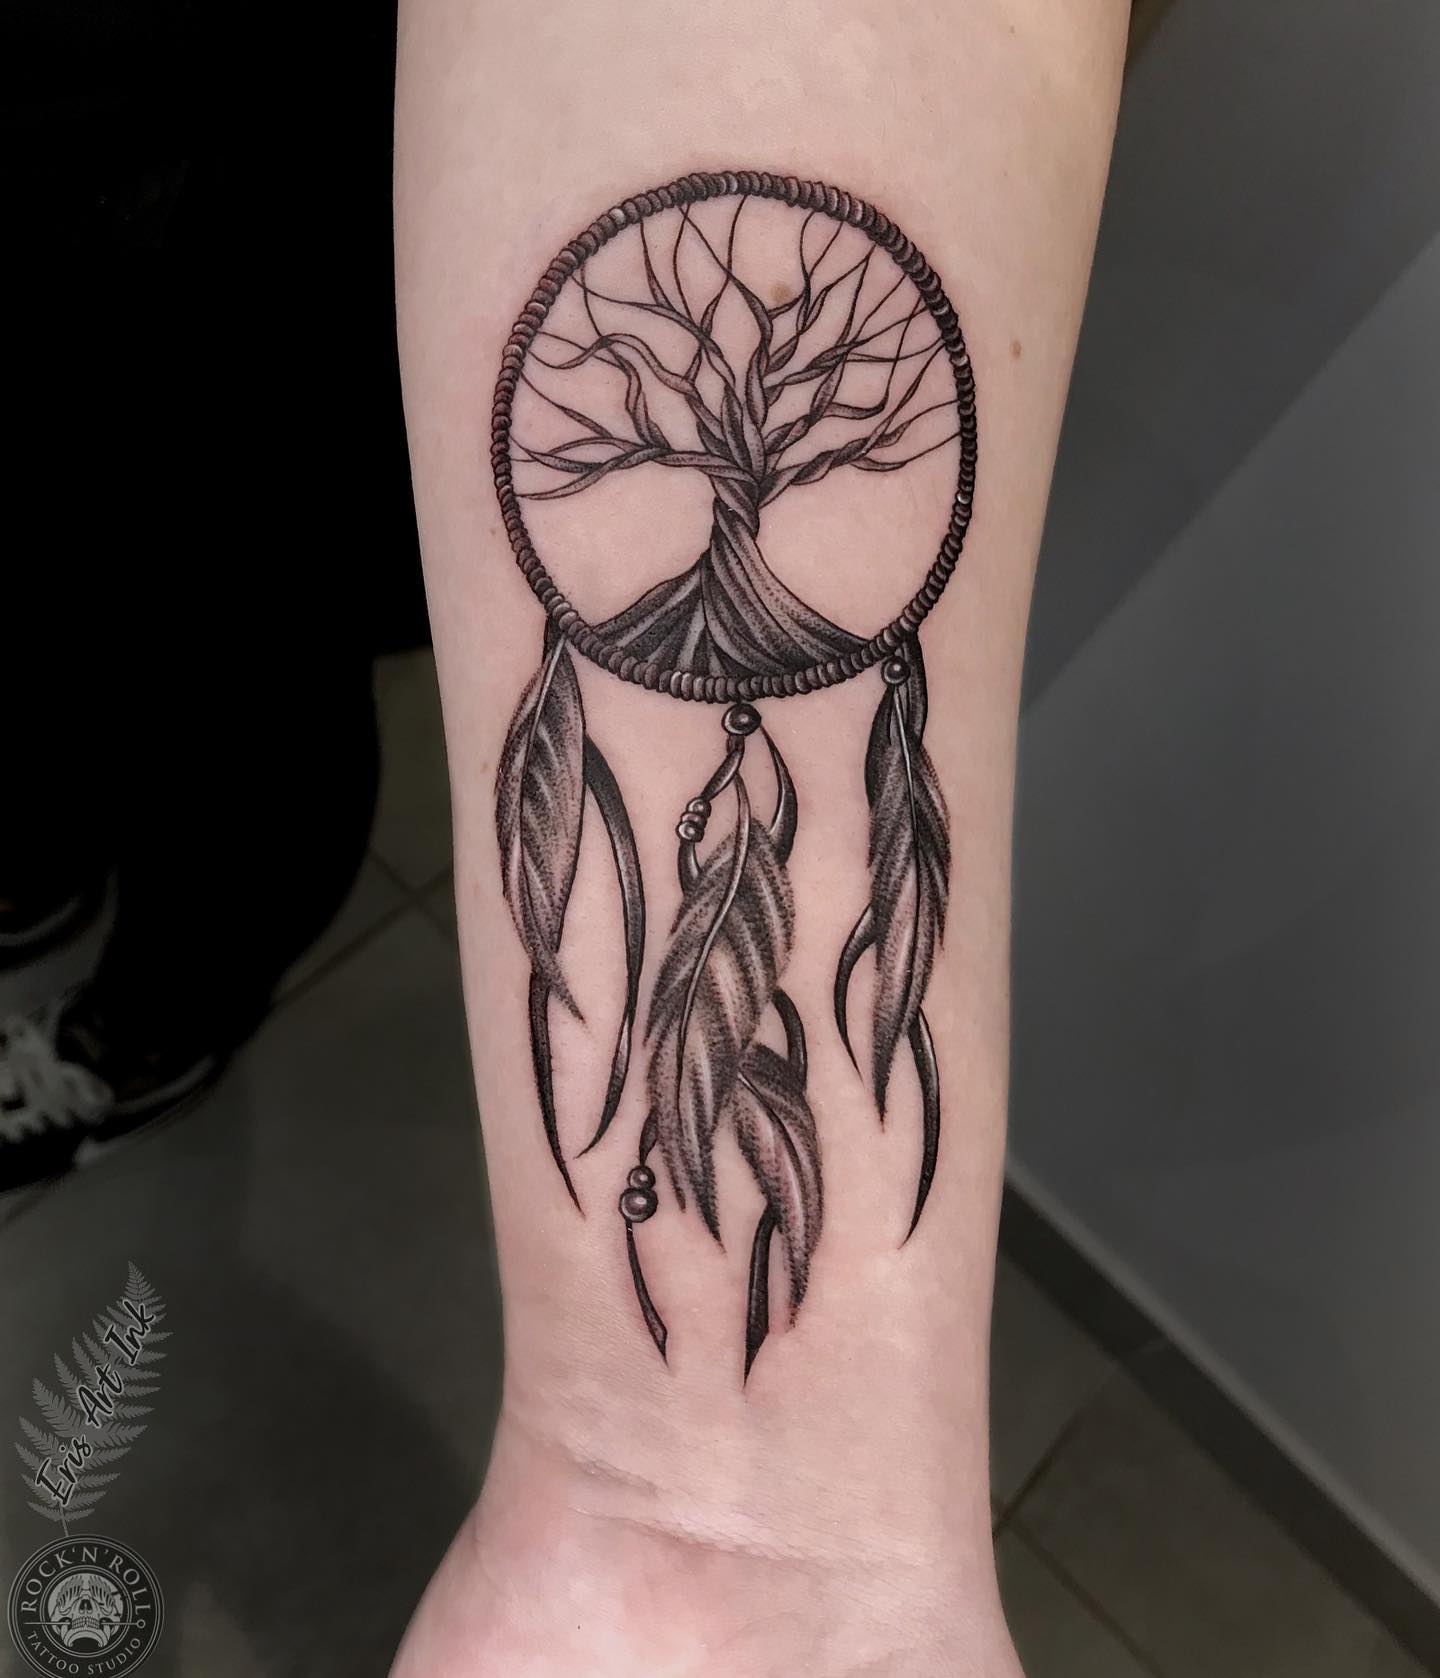 A dream catcher tattoo with a tree of life is a symbol of protection, hope, and happiness. It's used to capture bad dreams and let good ones pass through. The tree represents the universe, and the dream catcher stands for your dreams.